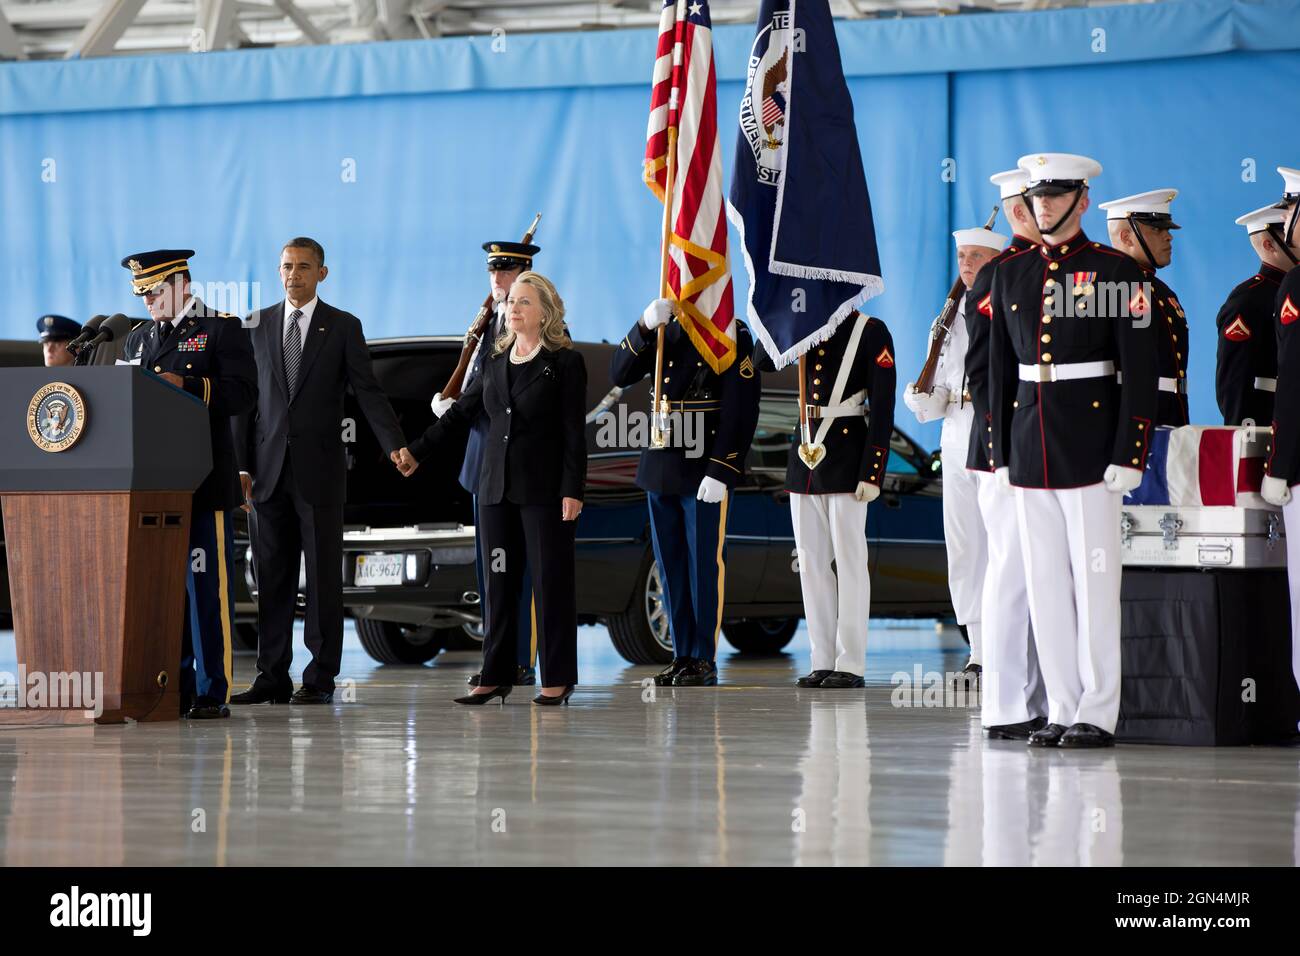 President Barack Obama stands with Secretary of State Hillary Rodham Clinton during the transfer of remains ceremony at Joint Base Andrews, Md., Sept. 14, 2012, marking the return to the United States of the remains of the four Americans killed in Benghazi, Libya. (Official White House Photo by Pete Souza) President Barack Obama stands with Secretary of State Hillary Rodham Clinton during the transfer of remains ceremony at Joint Base Andrews, Md., Sept. 14, 2012, marking the return to the United States of the remains of J. Christopher Stevens, U.S. Ambassador to Libya; Sean Smith, Information Stock Photo